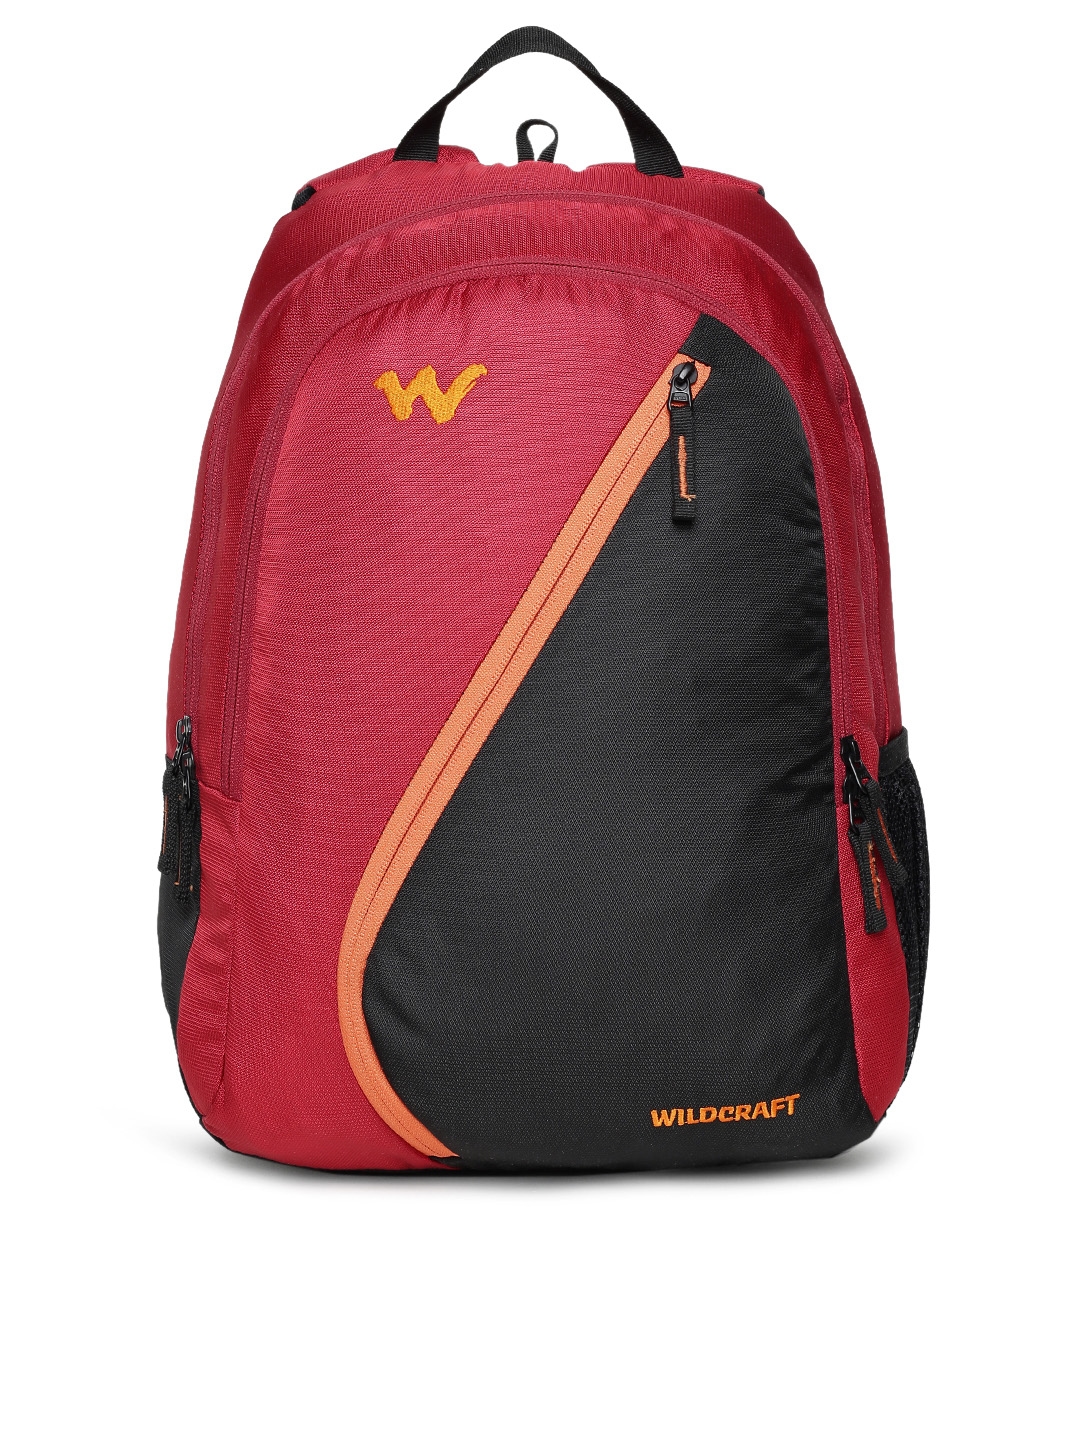 Buy Wildcraft 44 Ltrs Blaze 3 Wc Bold Orange Red Casual Backpack  12273WcBoldOrgRedHxWxD  19x135x105inches at Amazonin